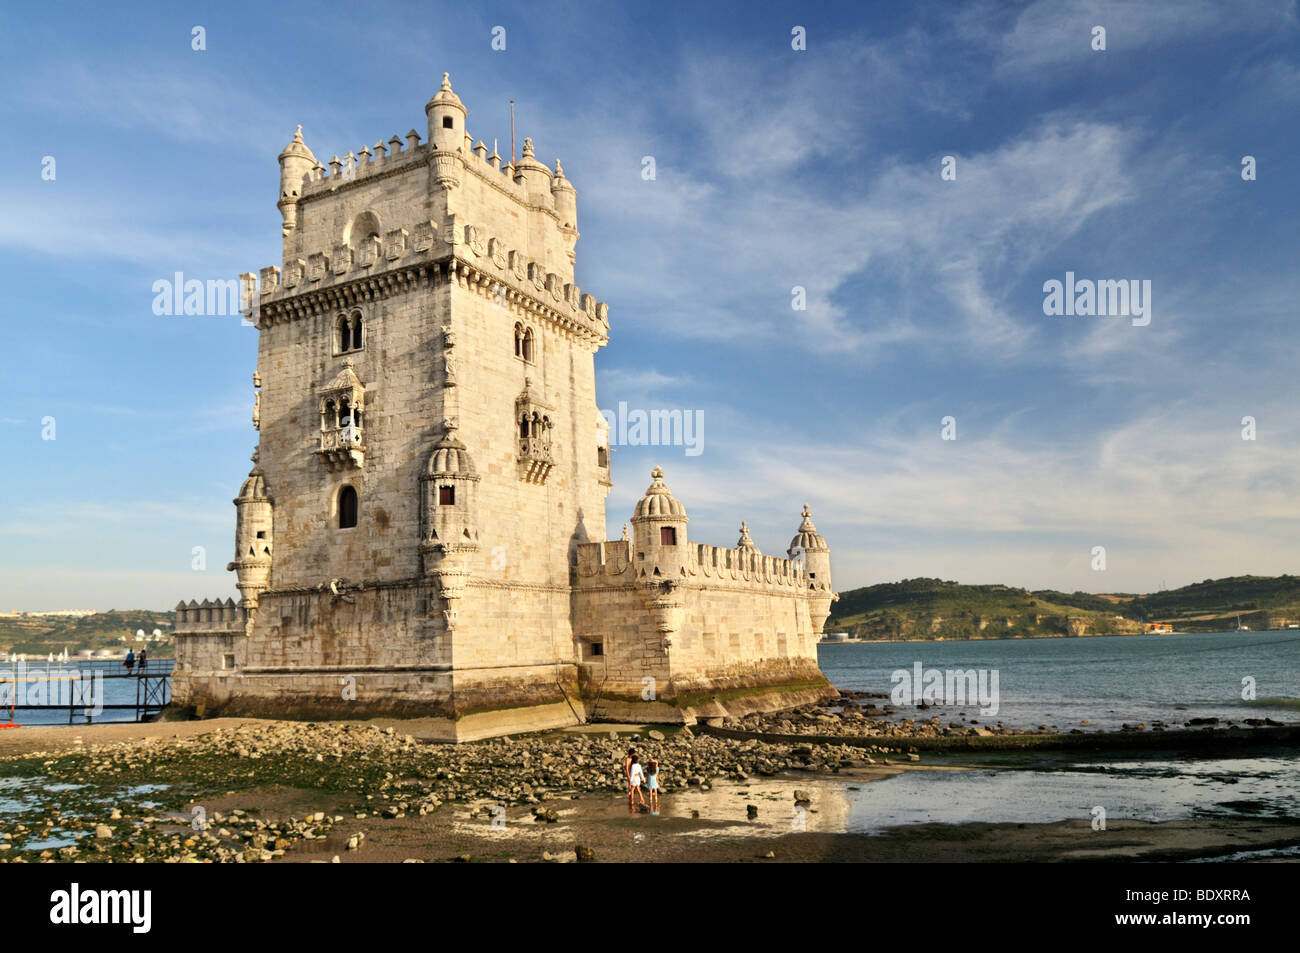 Torre de Belem, defensive fortification from the 16th century, UNESCO World Heritage Site, at the mouth of the Tagus River, Bel Stock Photo